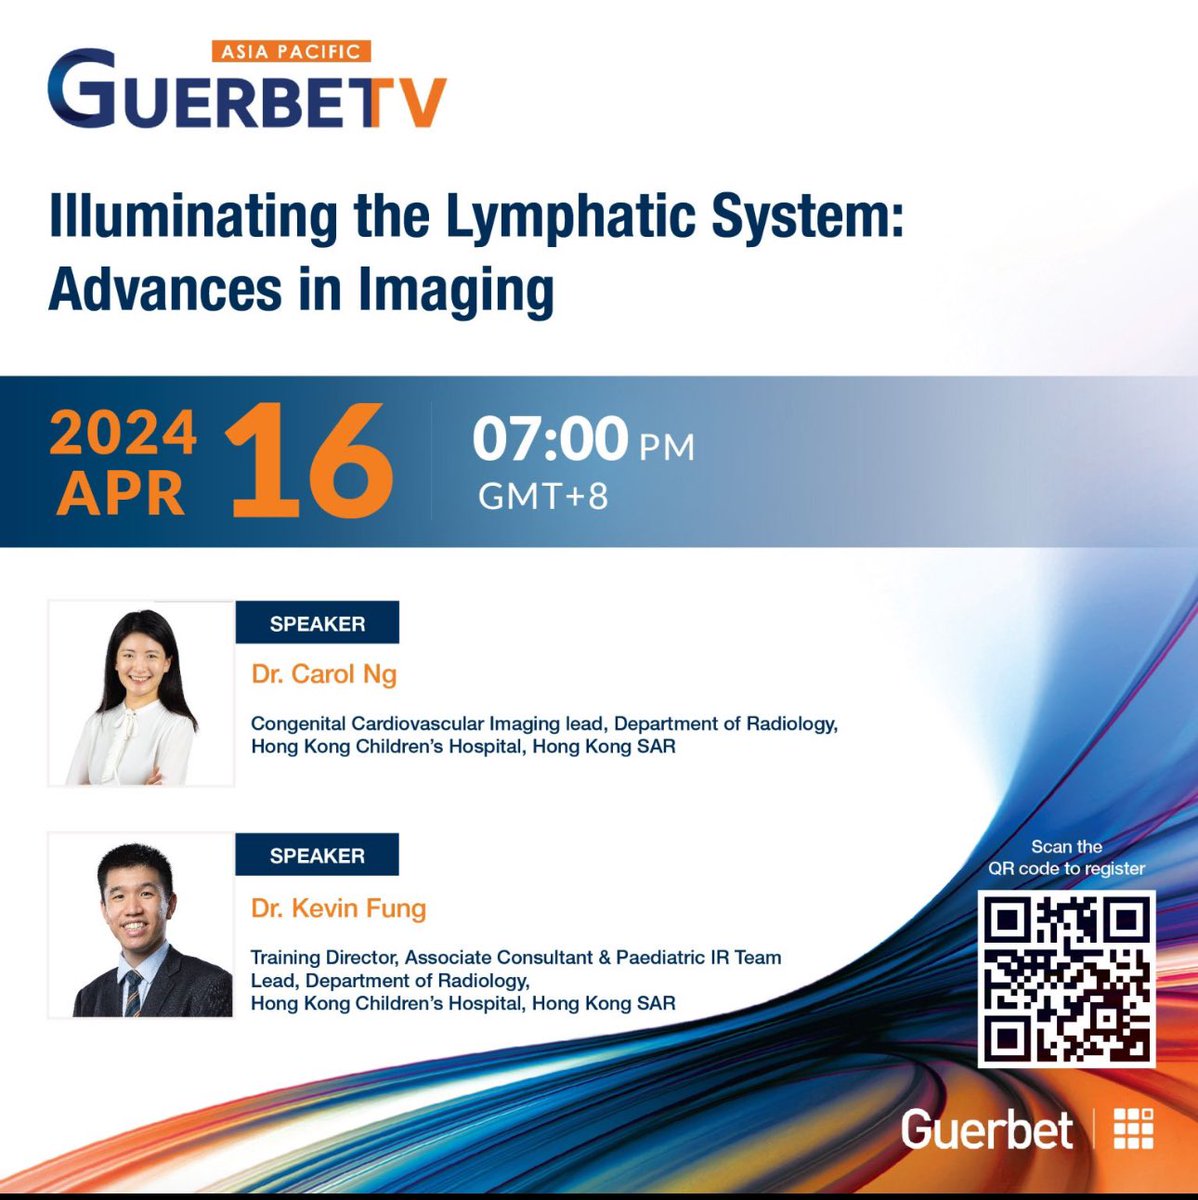 Looking forward to Can’t wait to share the latest on #lymphatic #imaging next week at @GuerbetAsia TV 🤩 Registration is open at bit.ly/3VOPyiz #LymphaticIR #PedIR